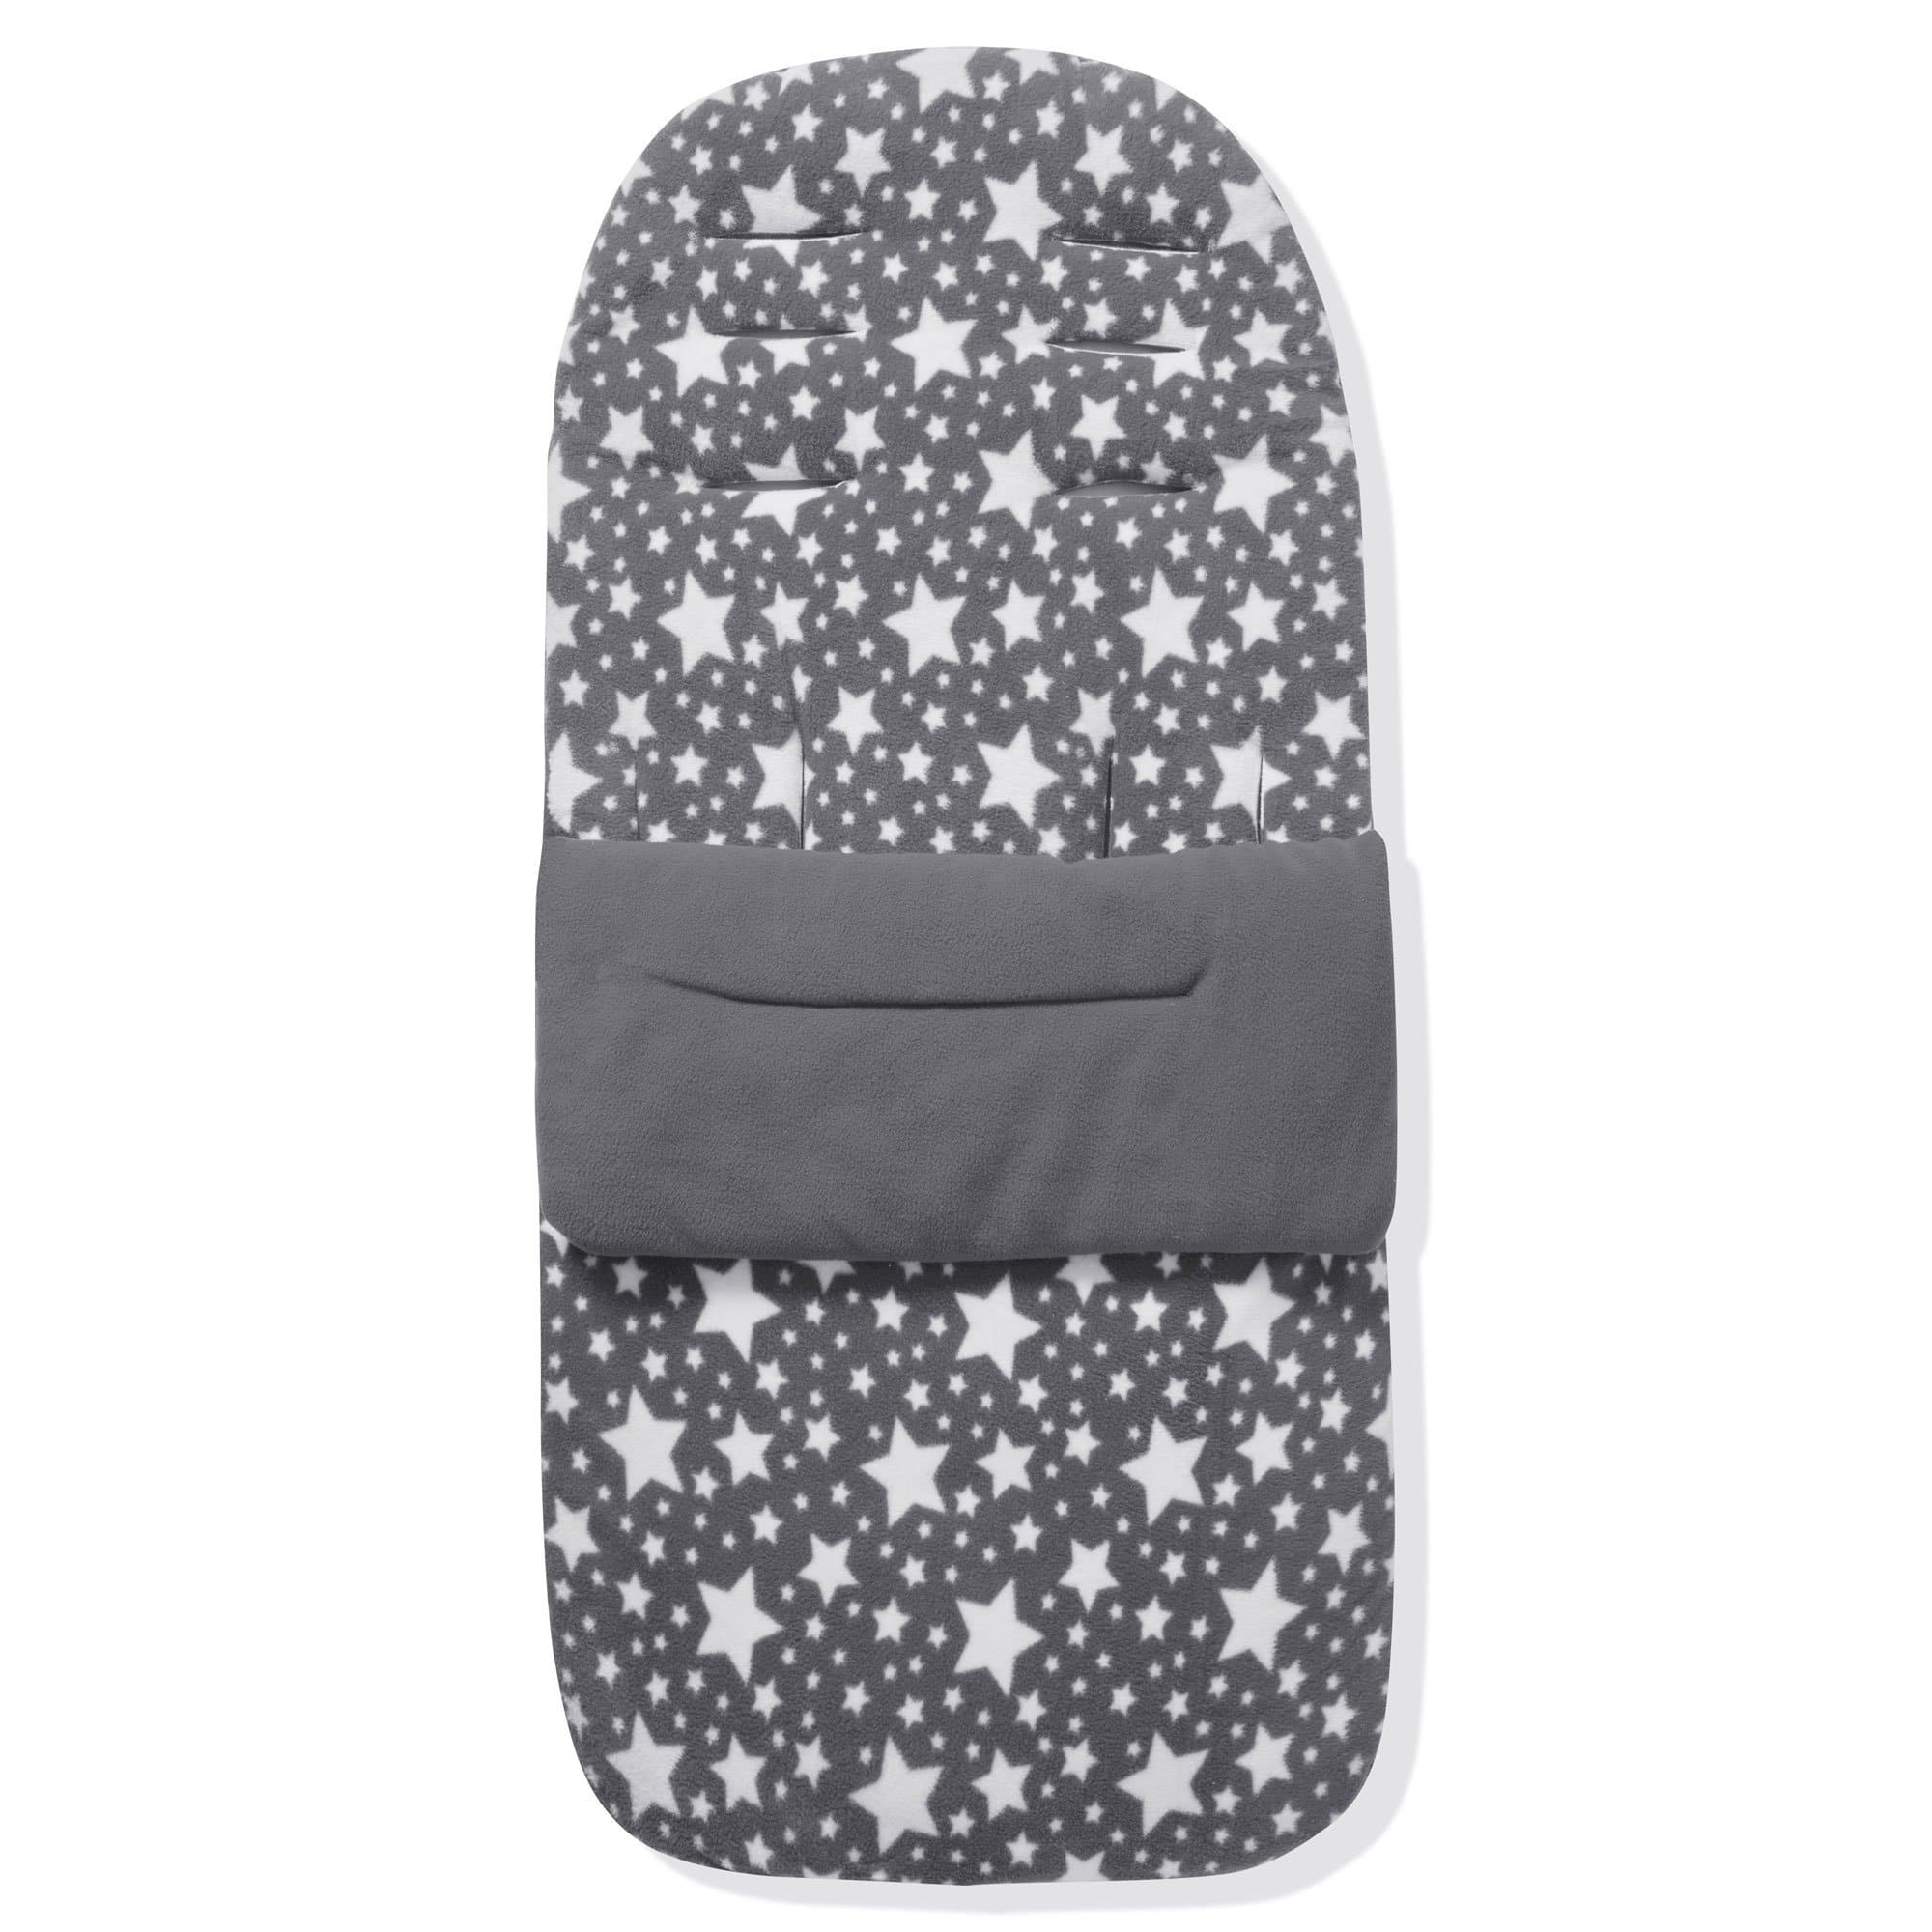 Fleece Footmuff / Cosy Toes Compatible with Urban Detour - Grey Star / Fits All Models | For Your Little One